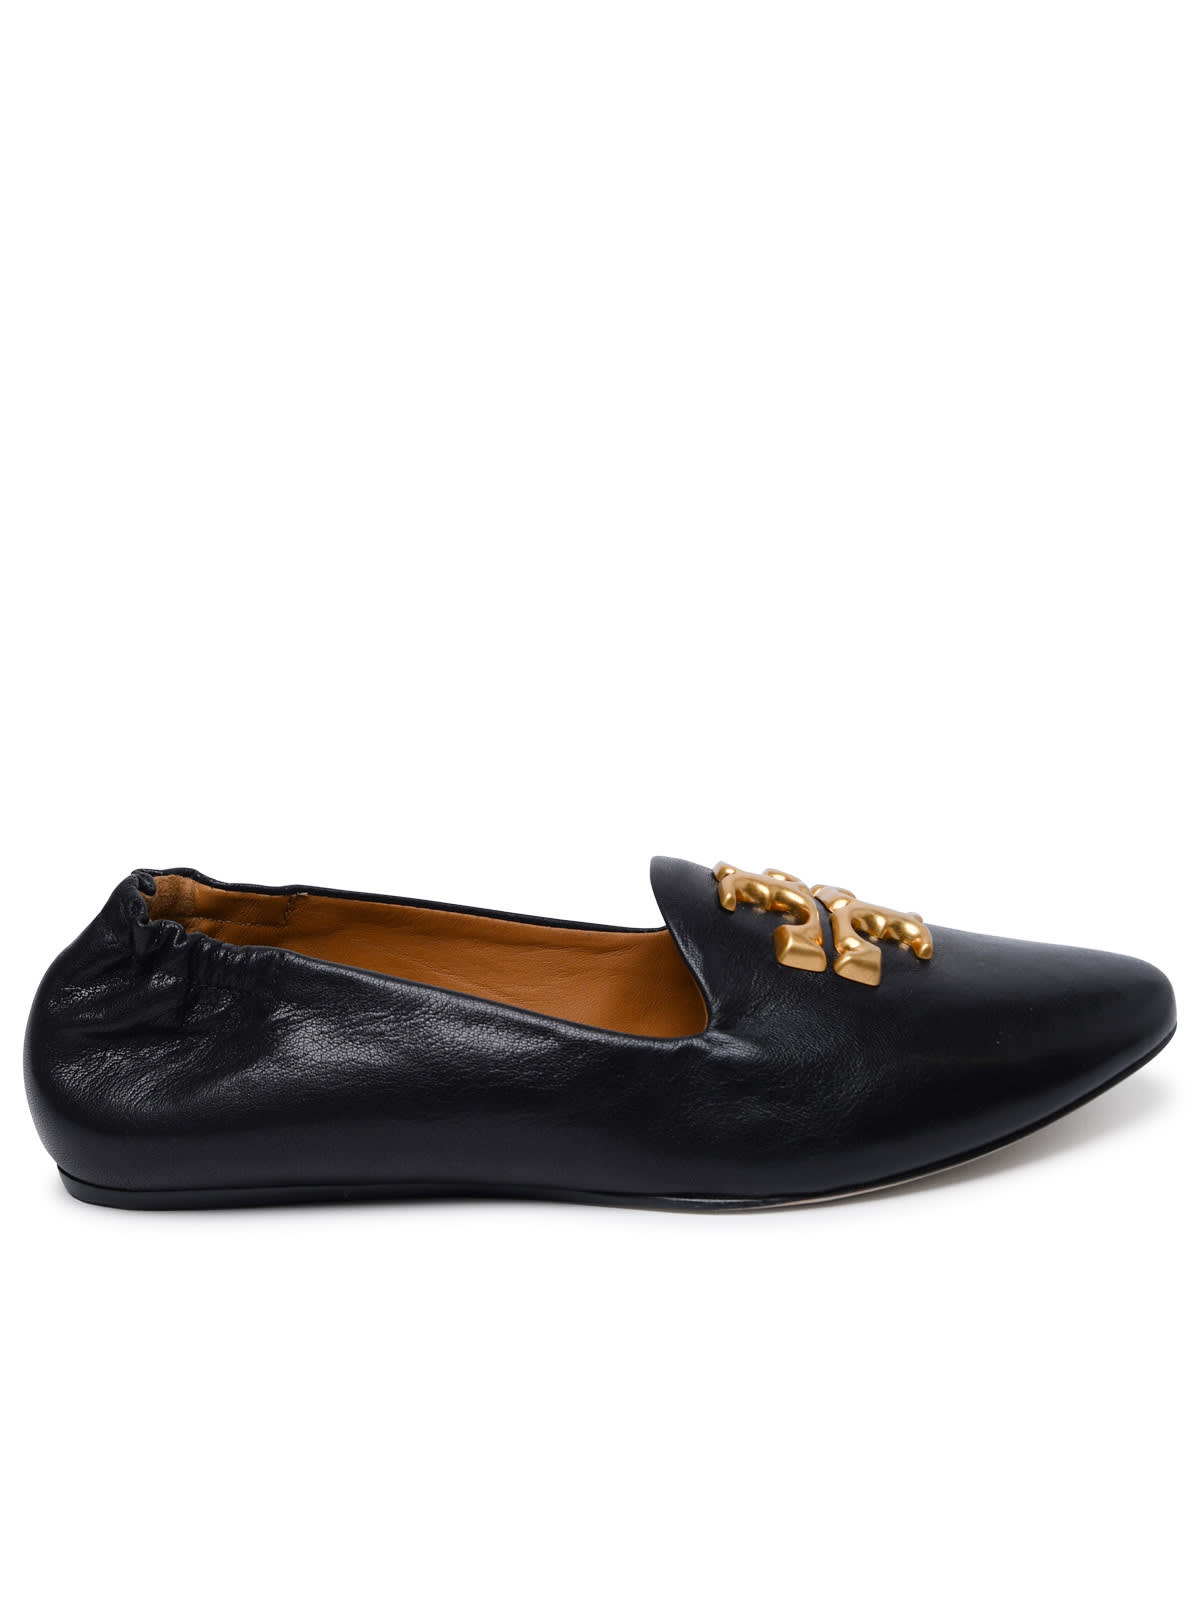 TORY BURCH ELEANOR BLACK LEATHER LOAFERS